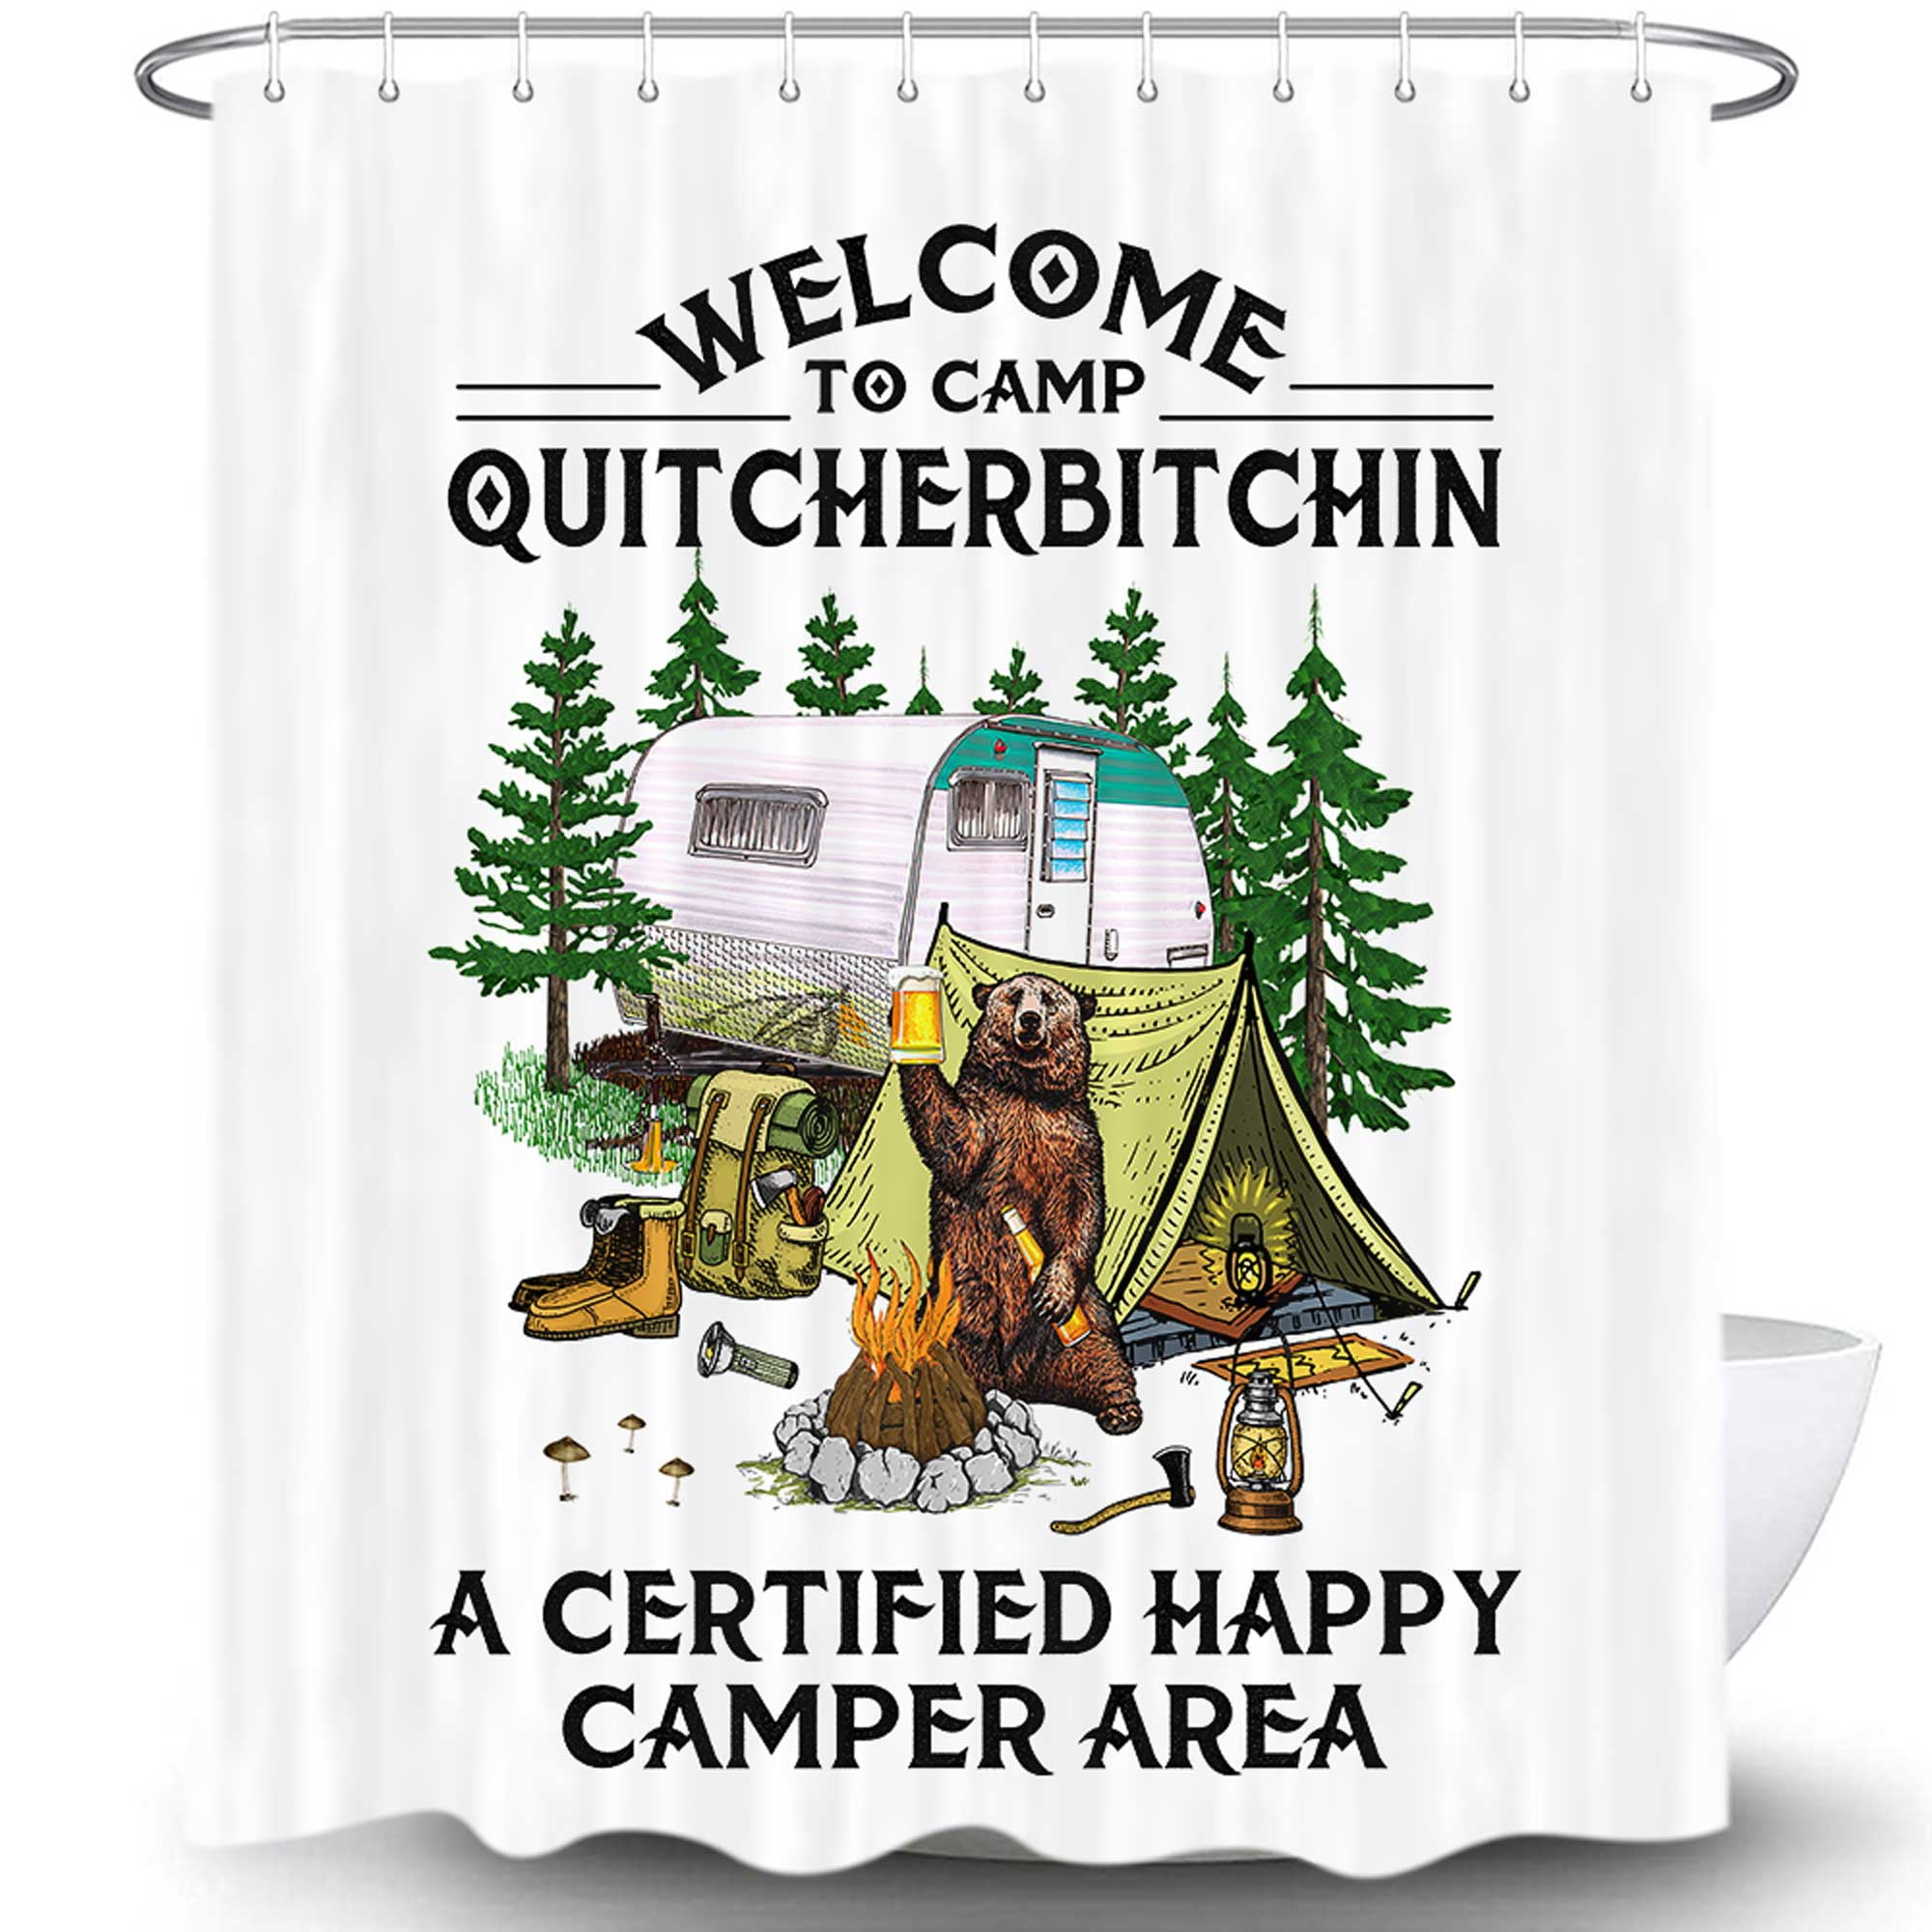 Details about   Camper Shower Curtain Bathroom Camping Woodland Animals Machine Washable Rings 